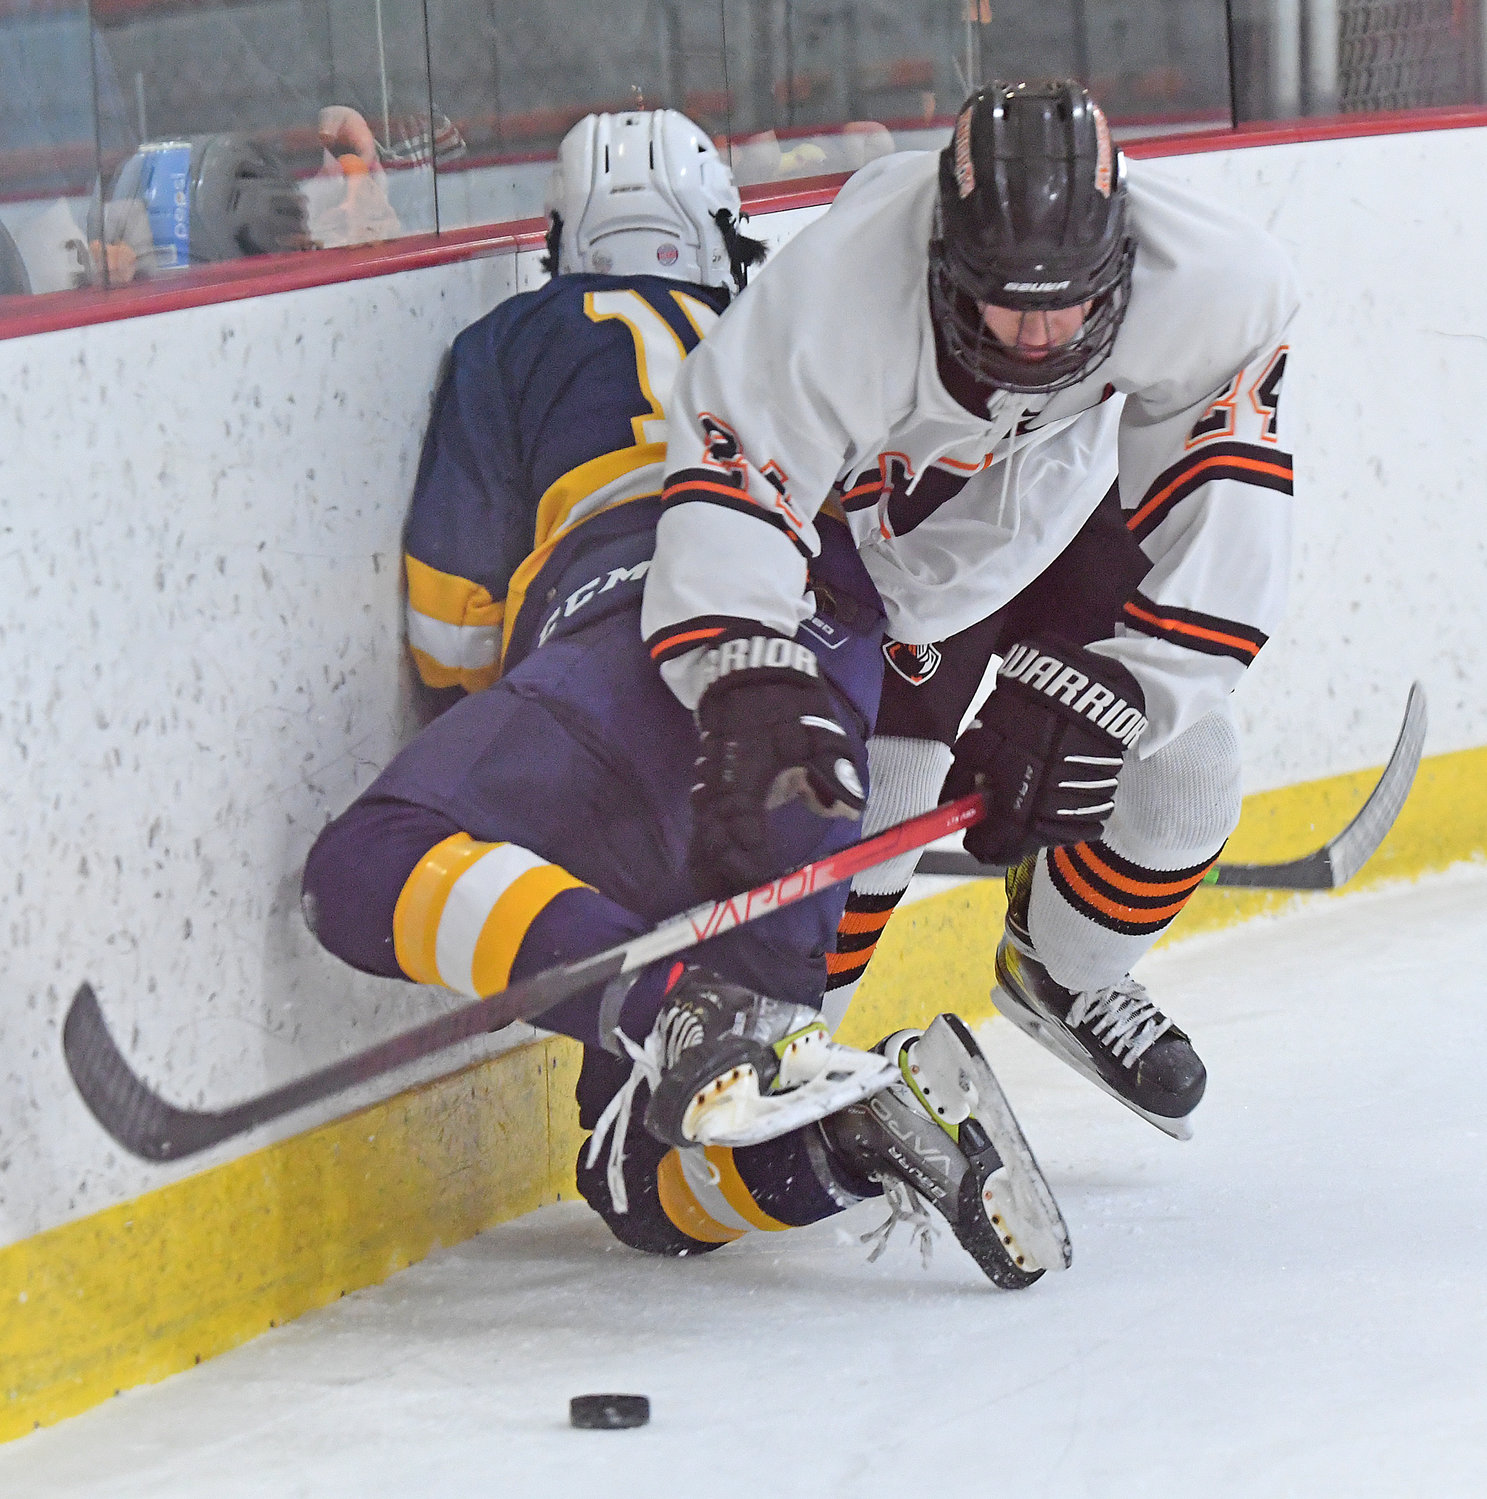 Rome Free Academy forward Jack Pylman pins West Genesee's Jesse Desena on the boards while trying to control the puck Tuesday night at Kennedy Arena. Both scored a goal but West Genny went on to a convincing 10-1 win.